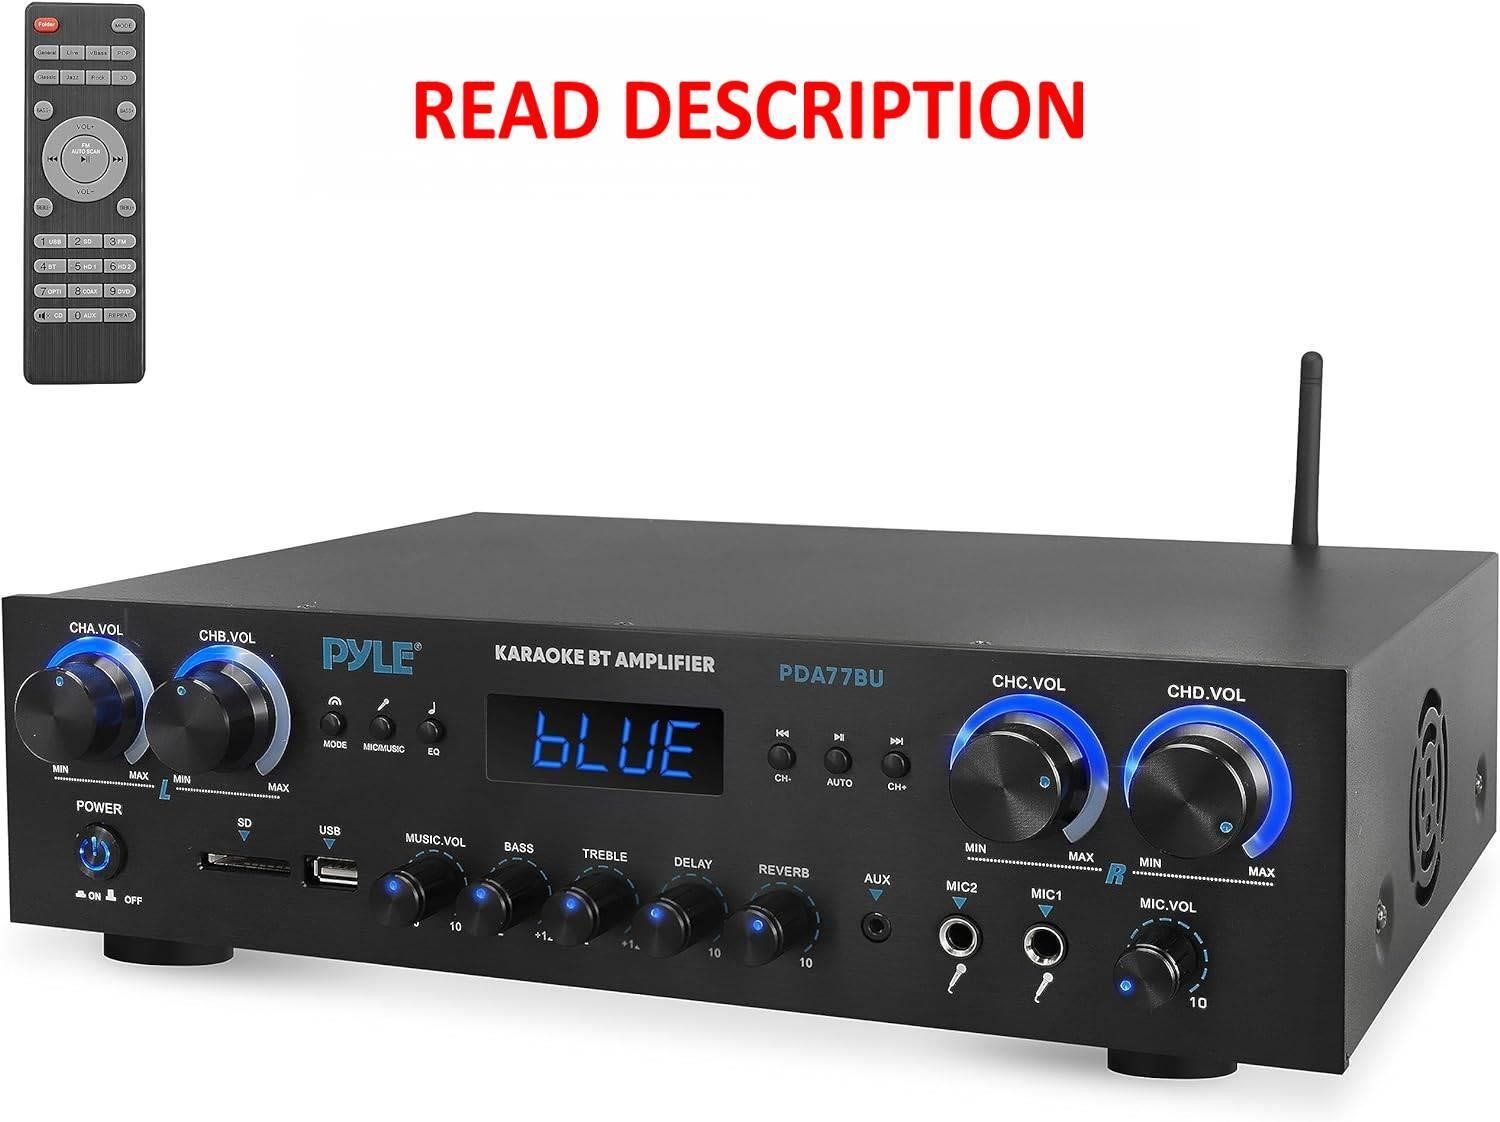 $120  Pyle Bluetooth Stereo Receiver, 500W